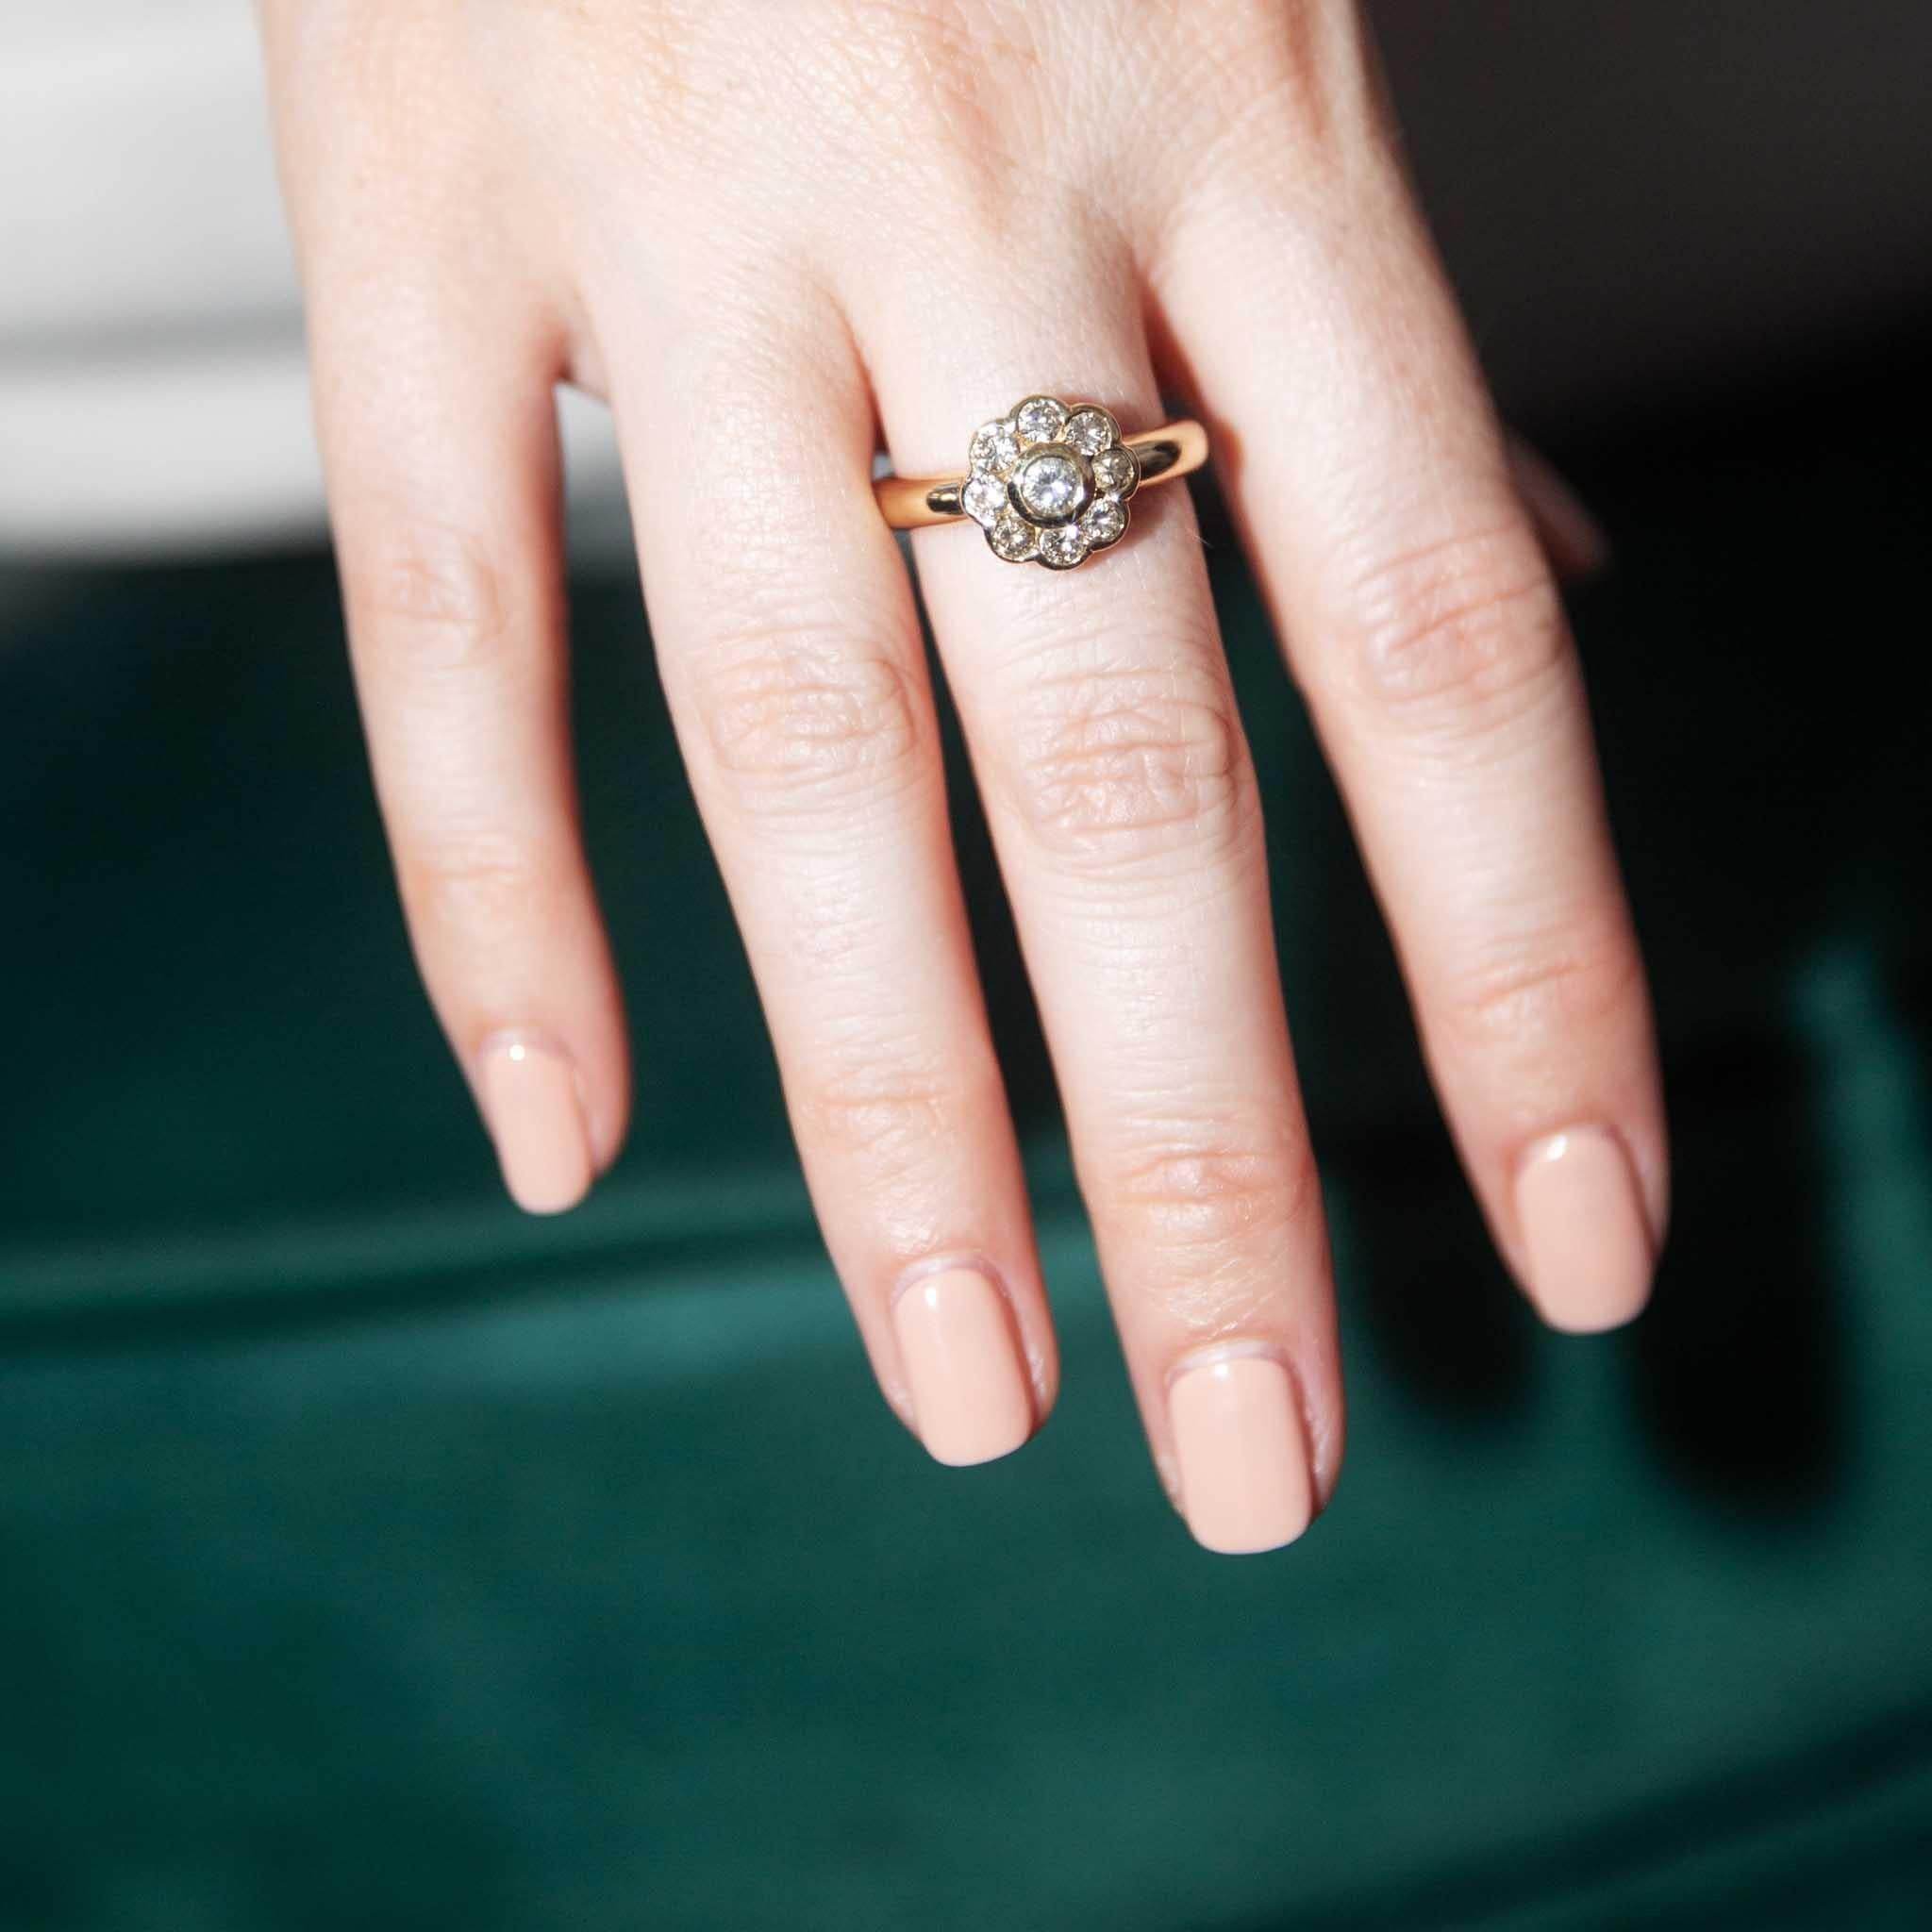 Our Velma Ring is an 18 carat gold vision. With her sparkling diamonds set in a 'Daisy' cluster, she is a stunning and impactful accessory.  A ring to be added to your family history for generations to come. 

The Velma Ring Gem Details
The round